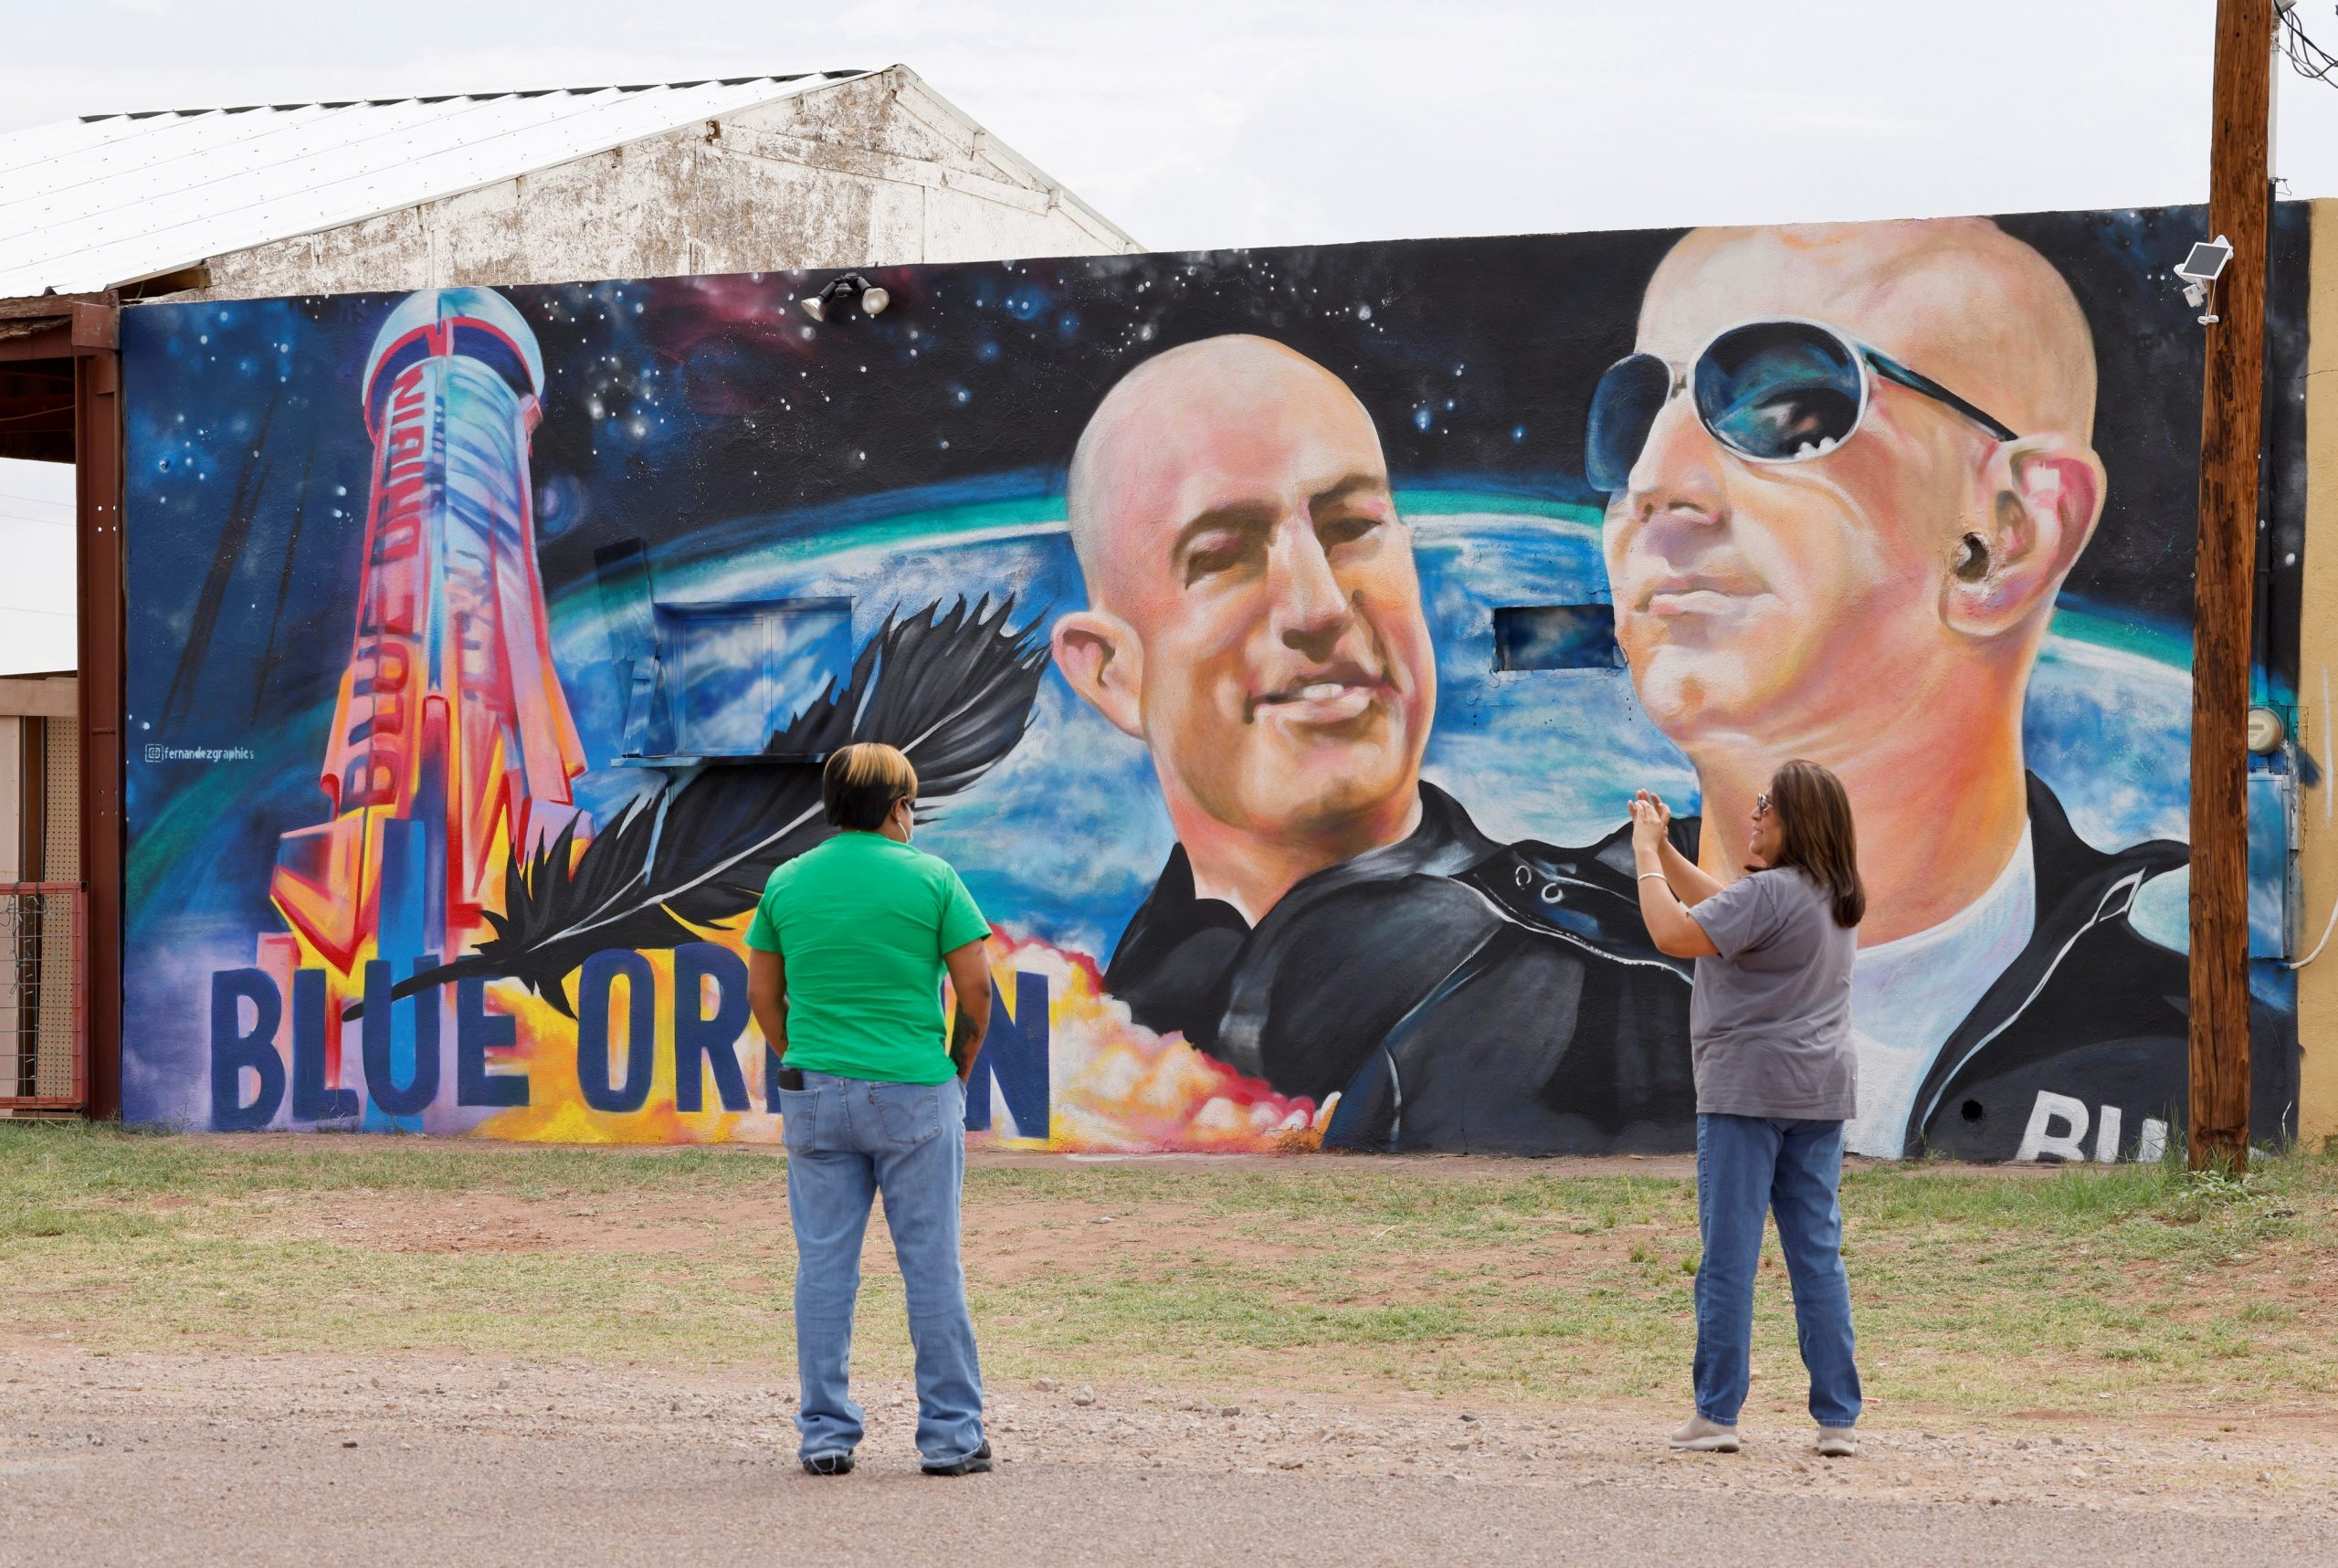 A woman photographs another person in front of a mural showing Jeff Bezos and a space launch.